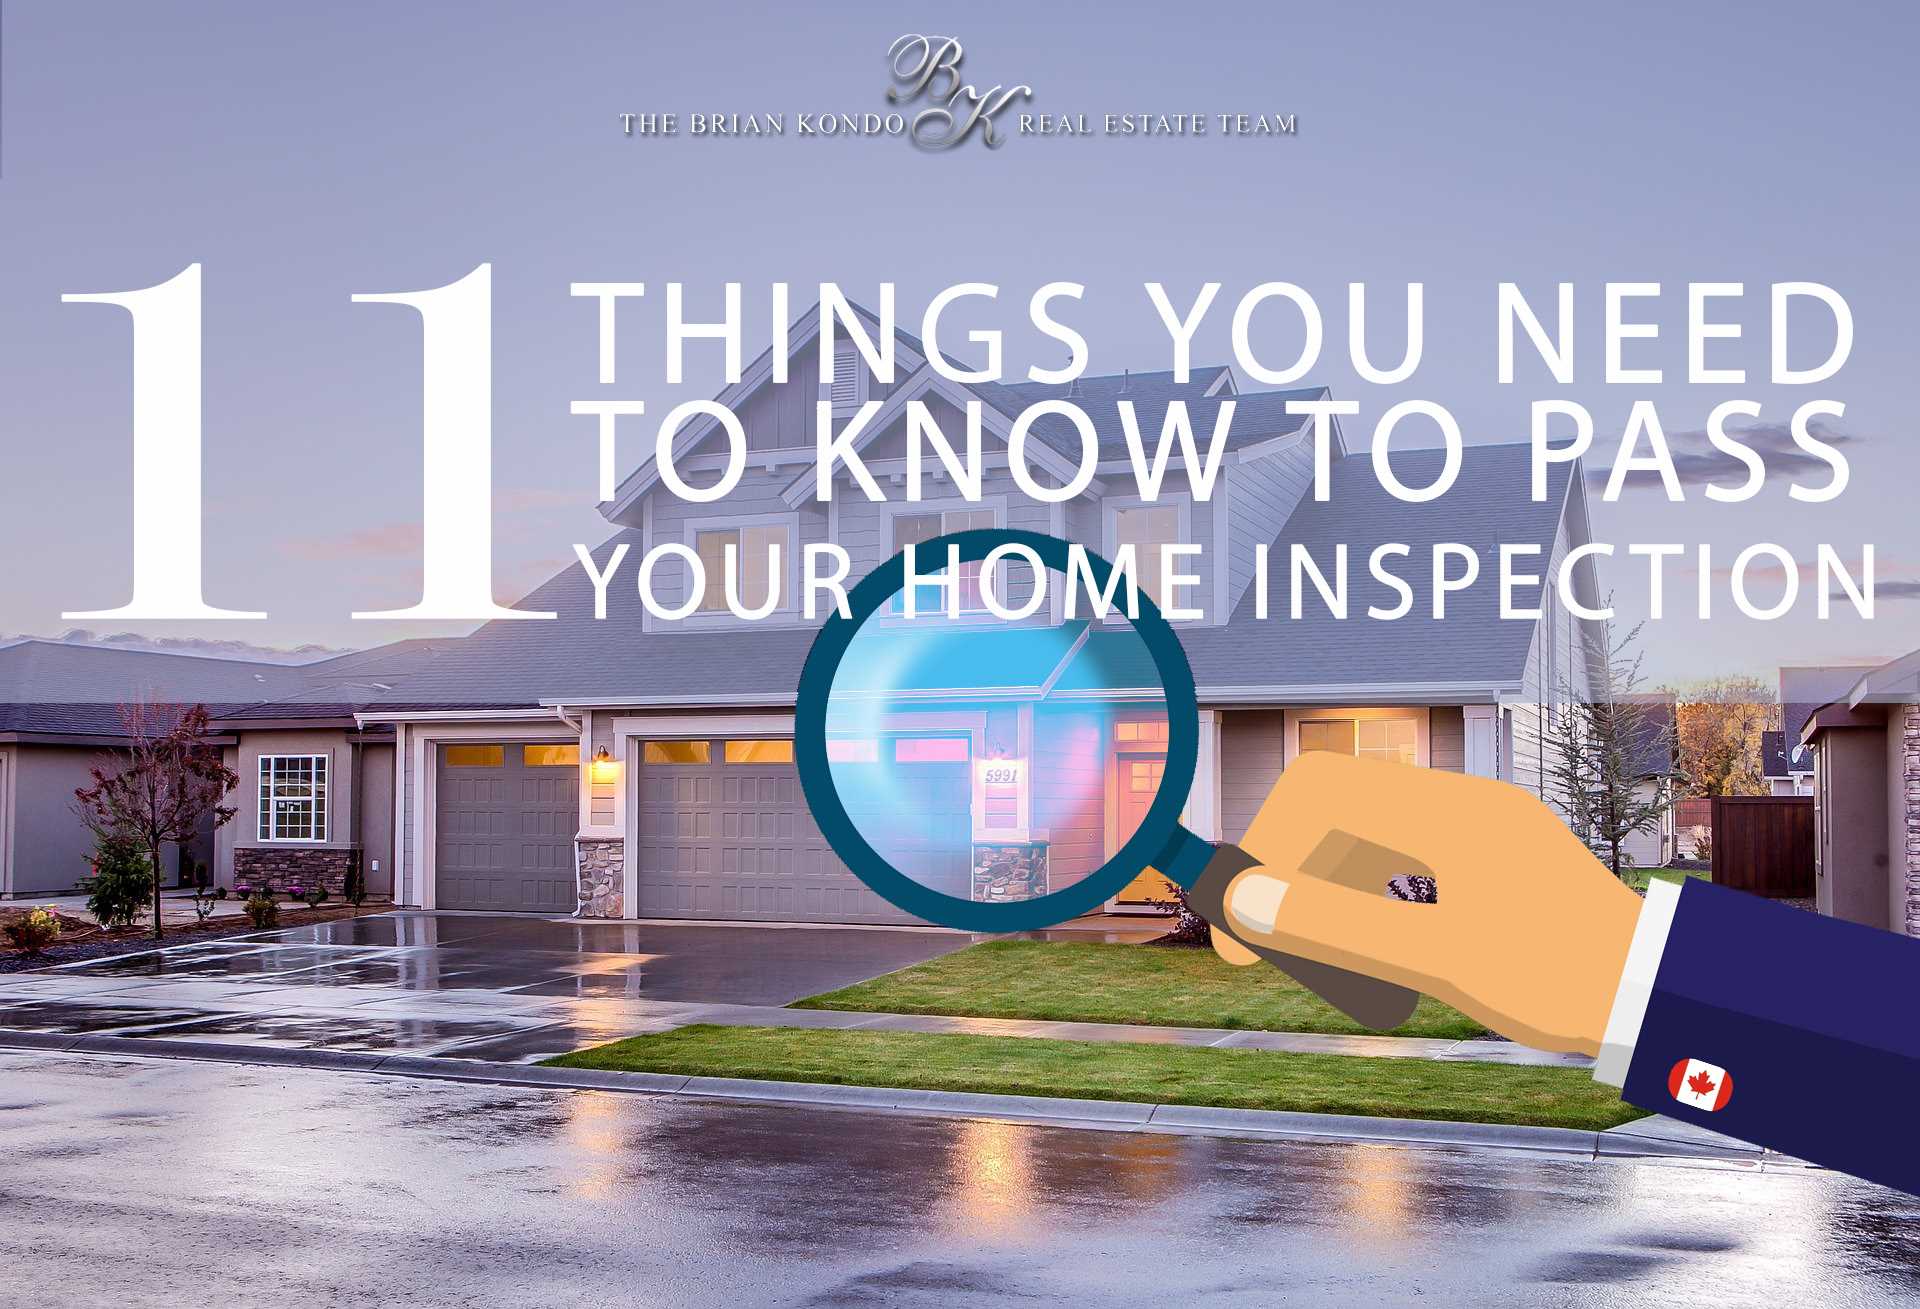 How to Pass your Home Inspection